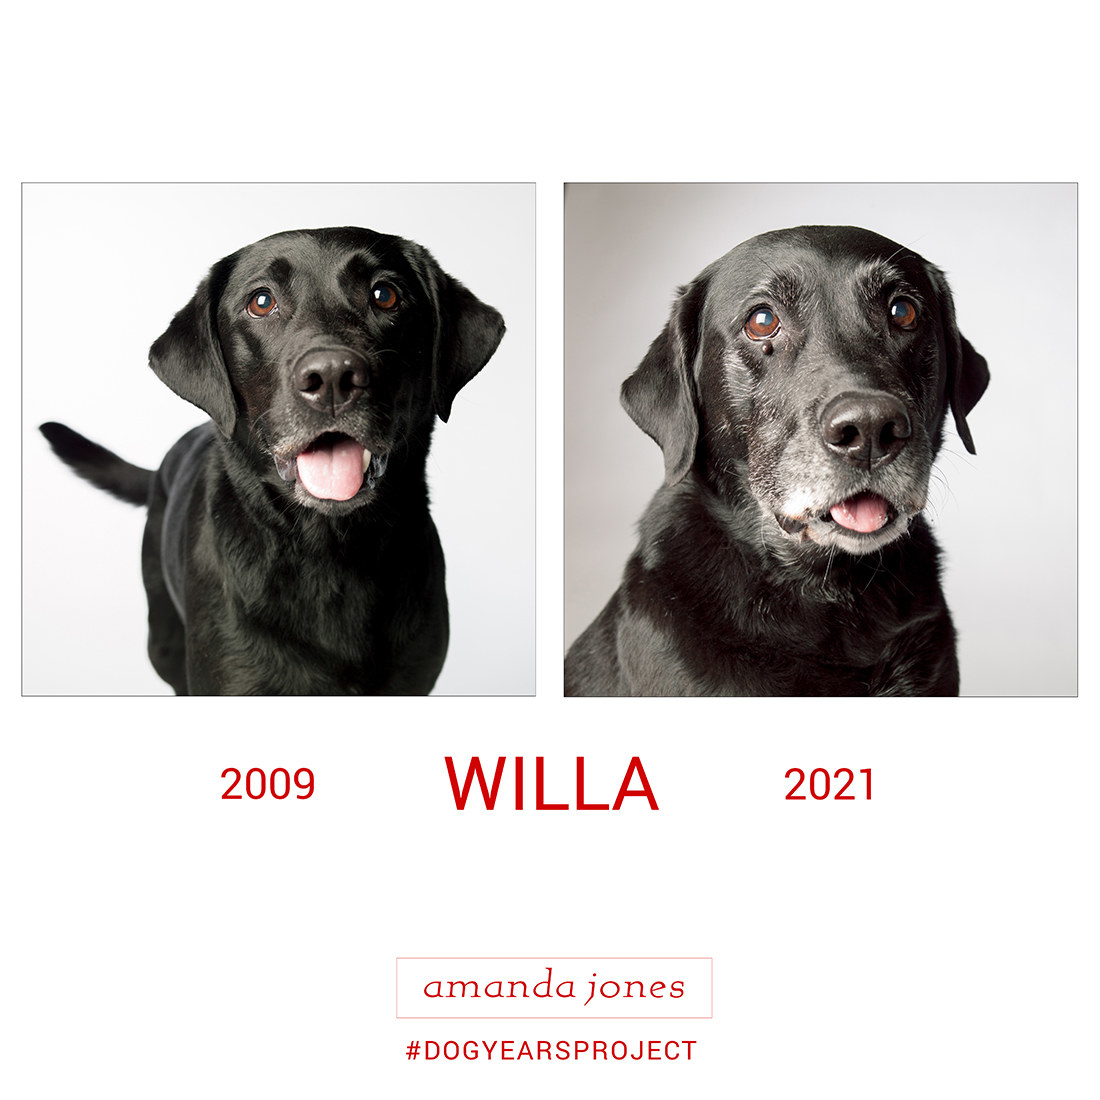 photograph of a dog named willa taken in 2009 and again in 2021